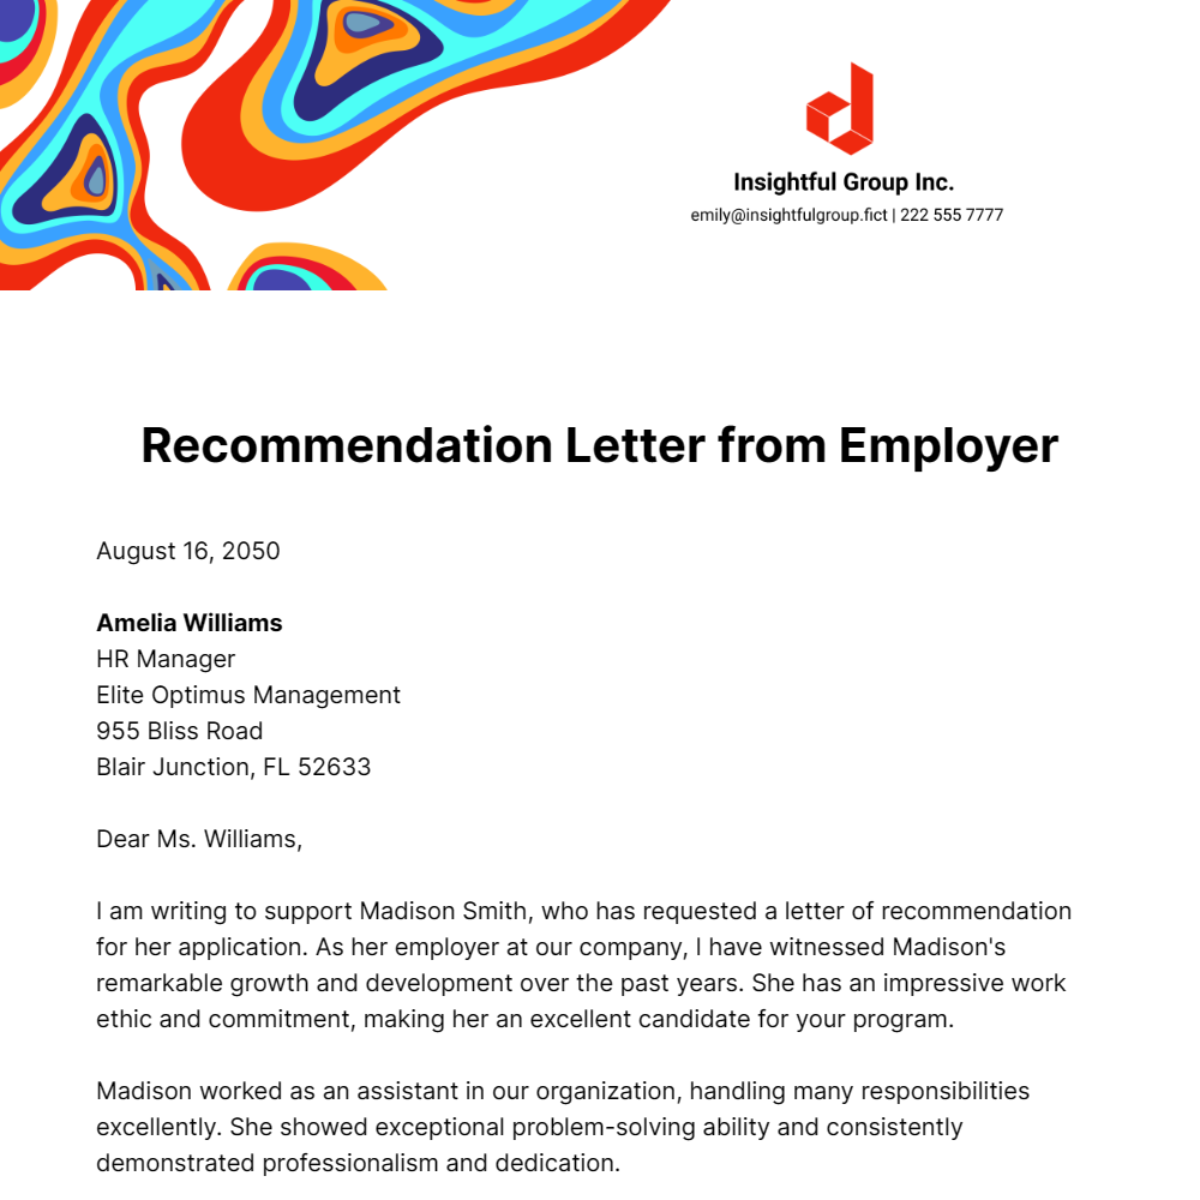 Free Recommendation Letter from Employer Template